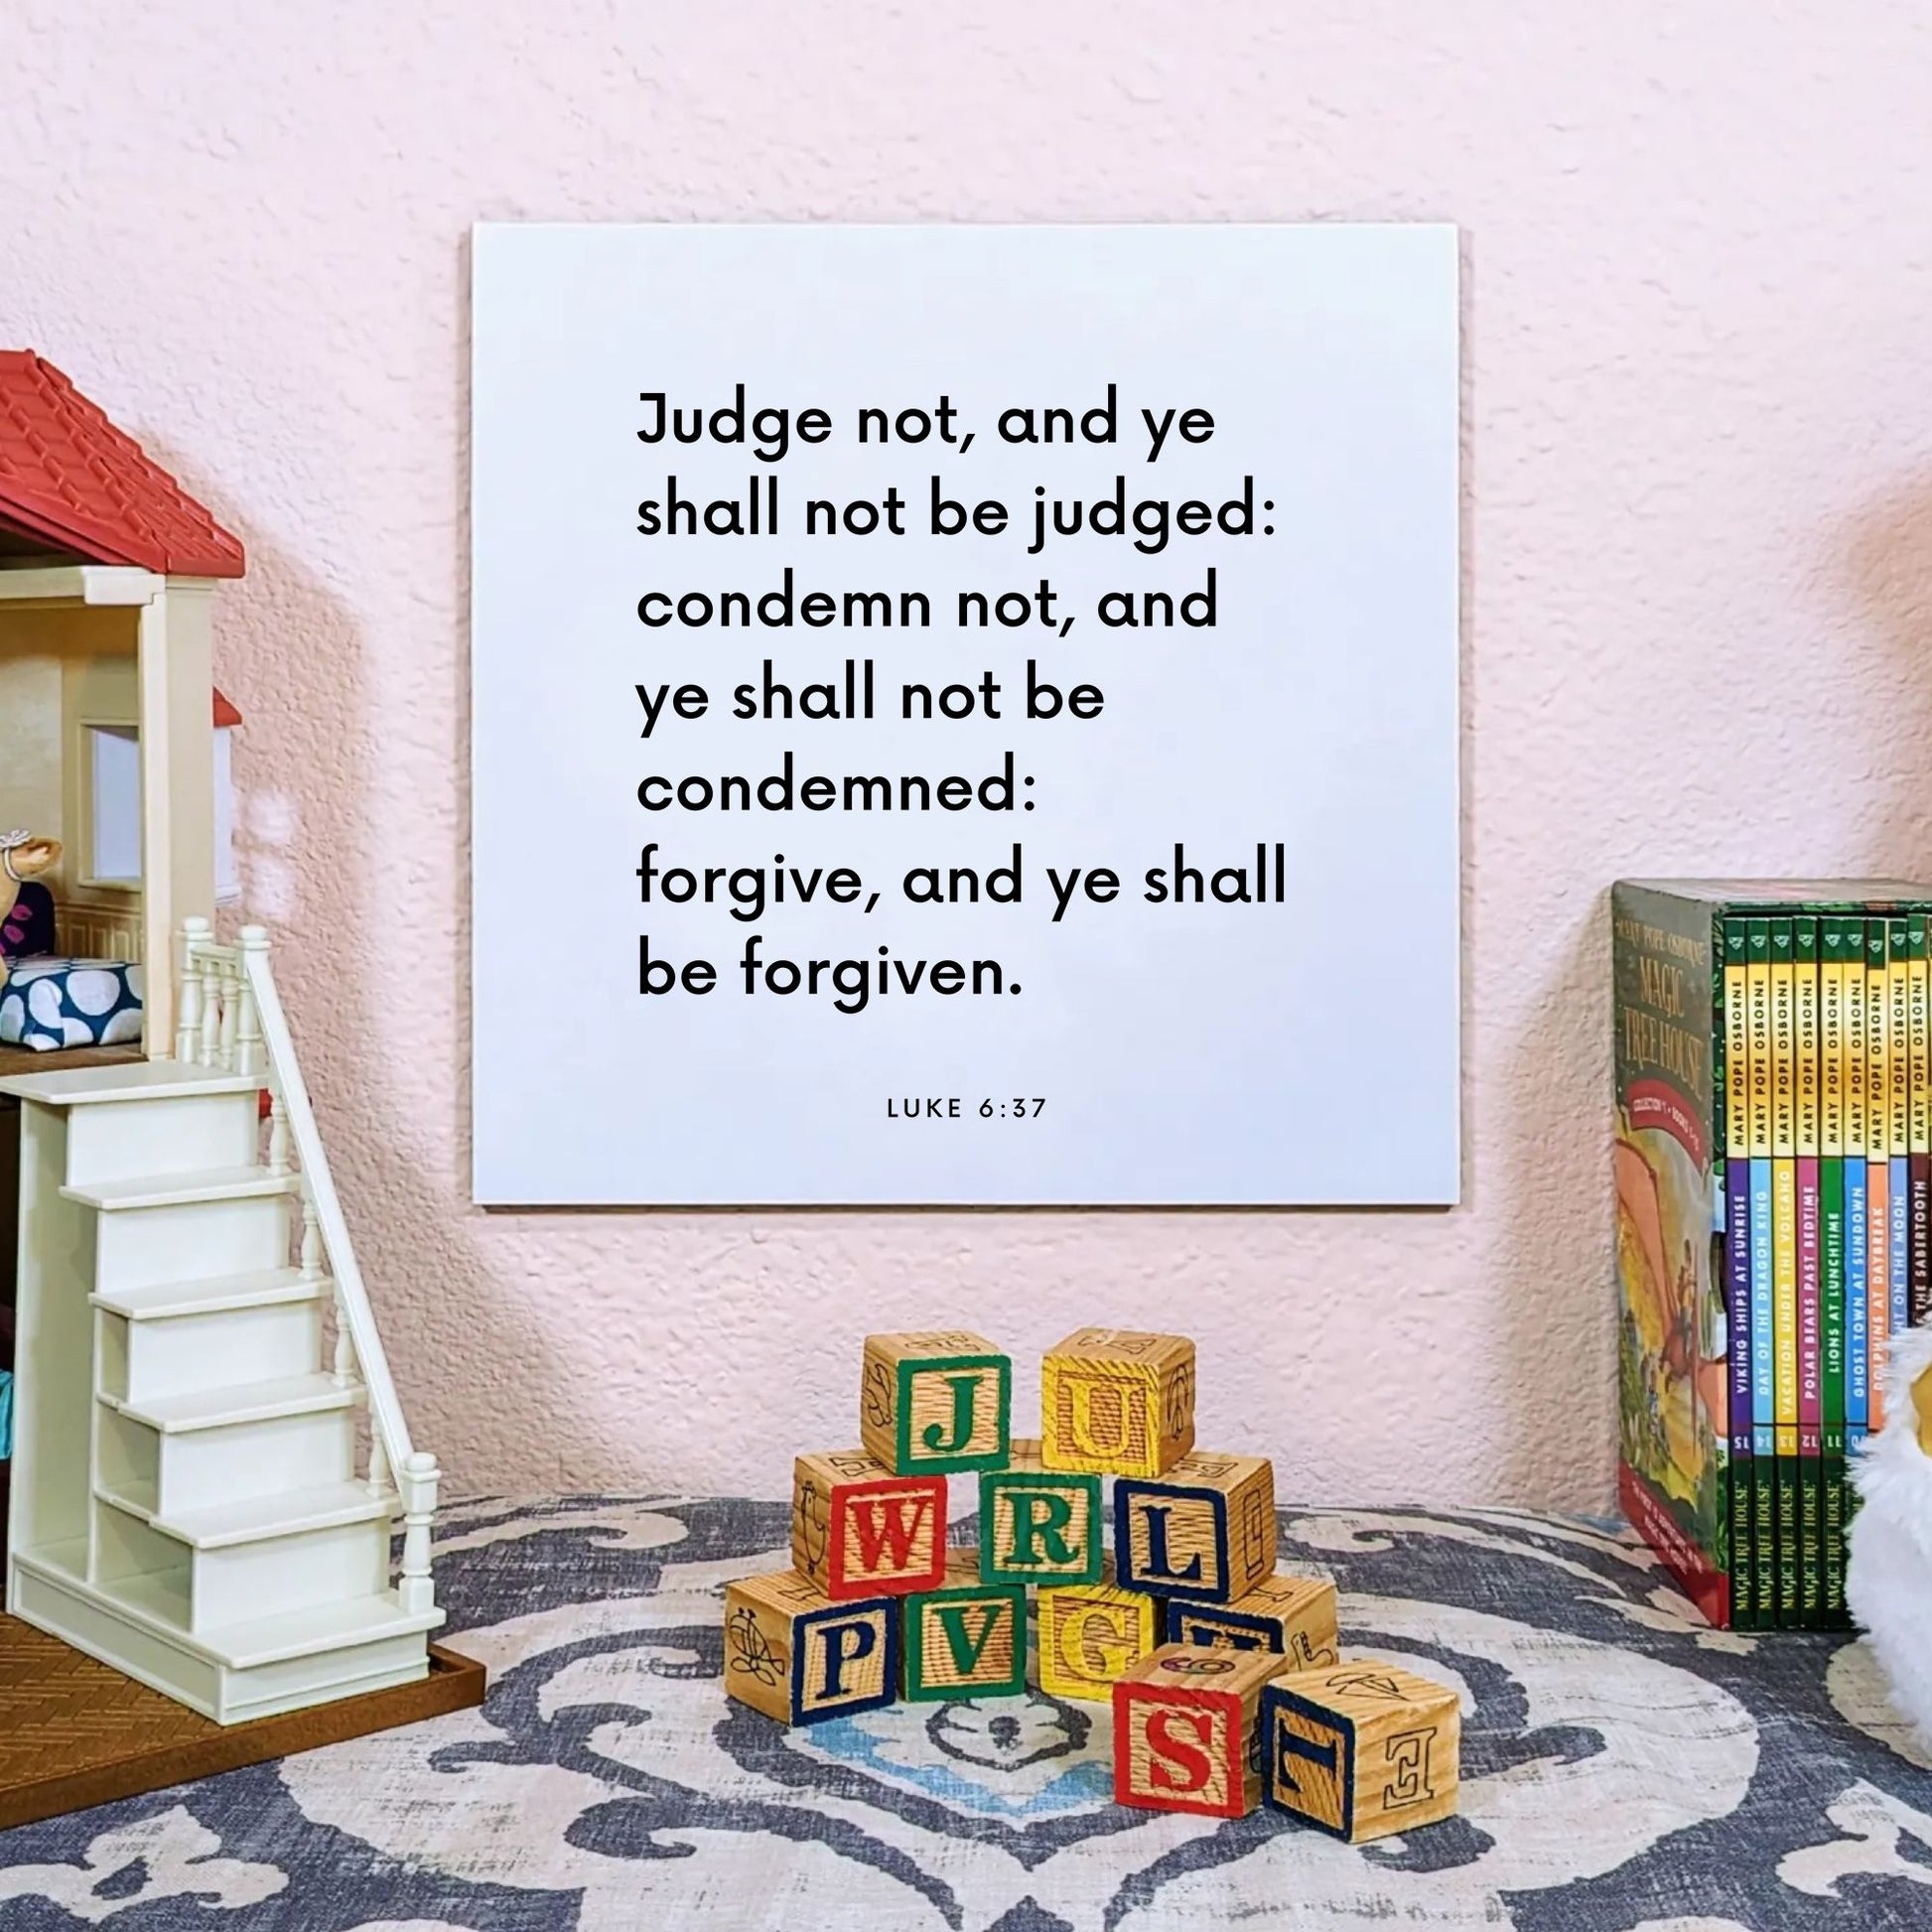 Playroom mouting of the scripture tile for Luke 6:37 - "Judge not, and ye shall not be judged"